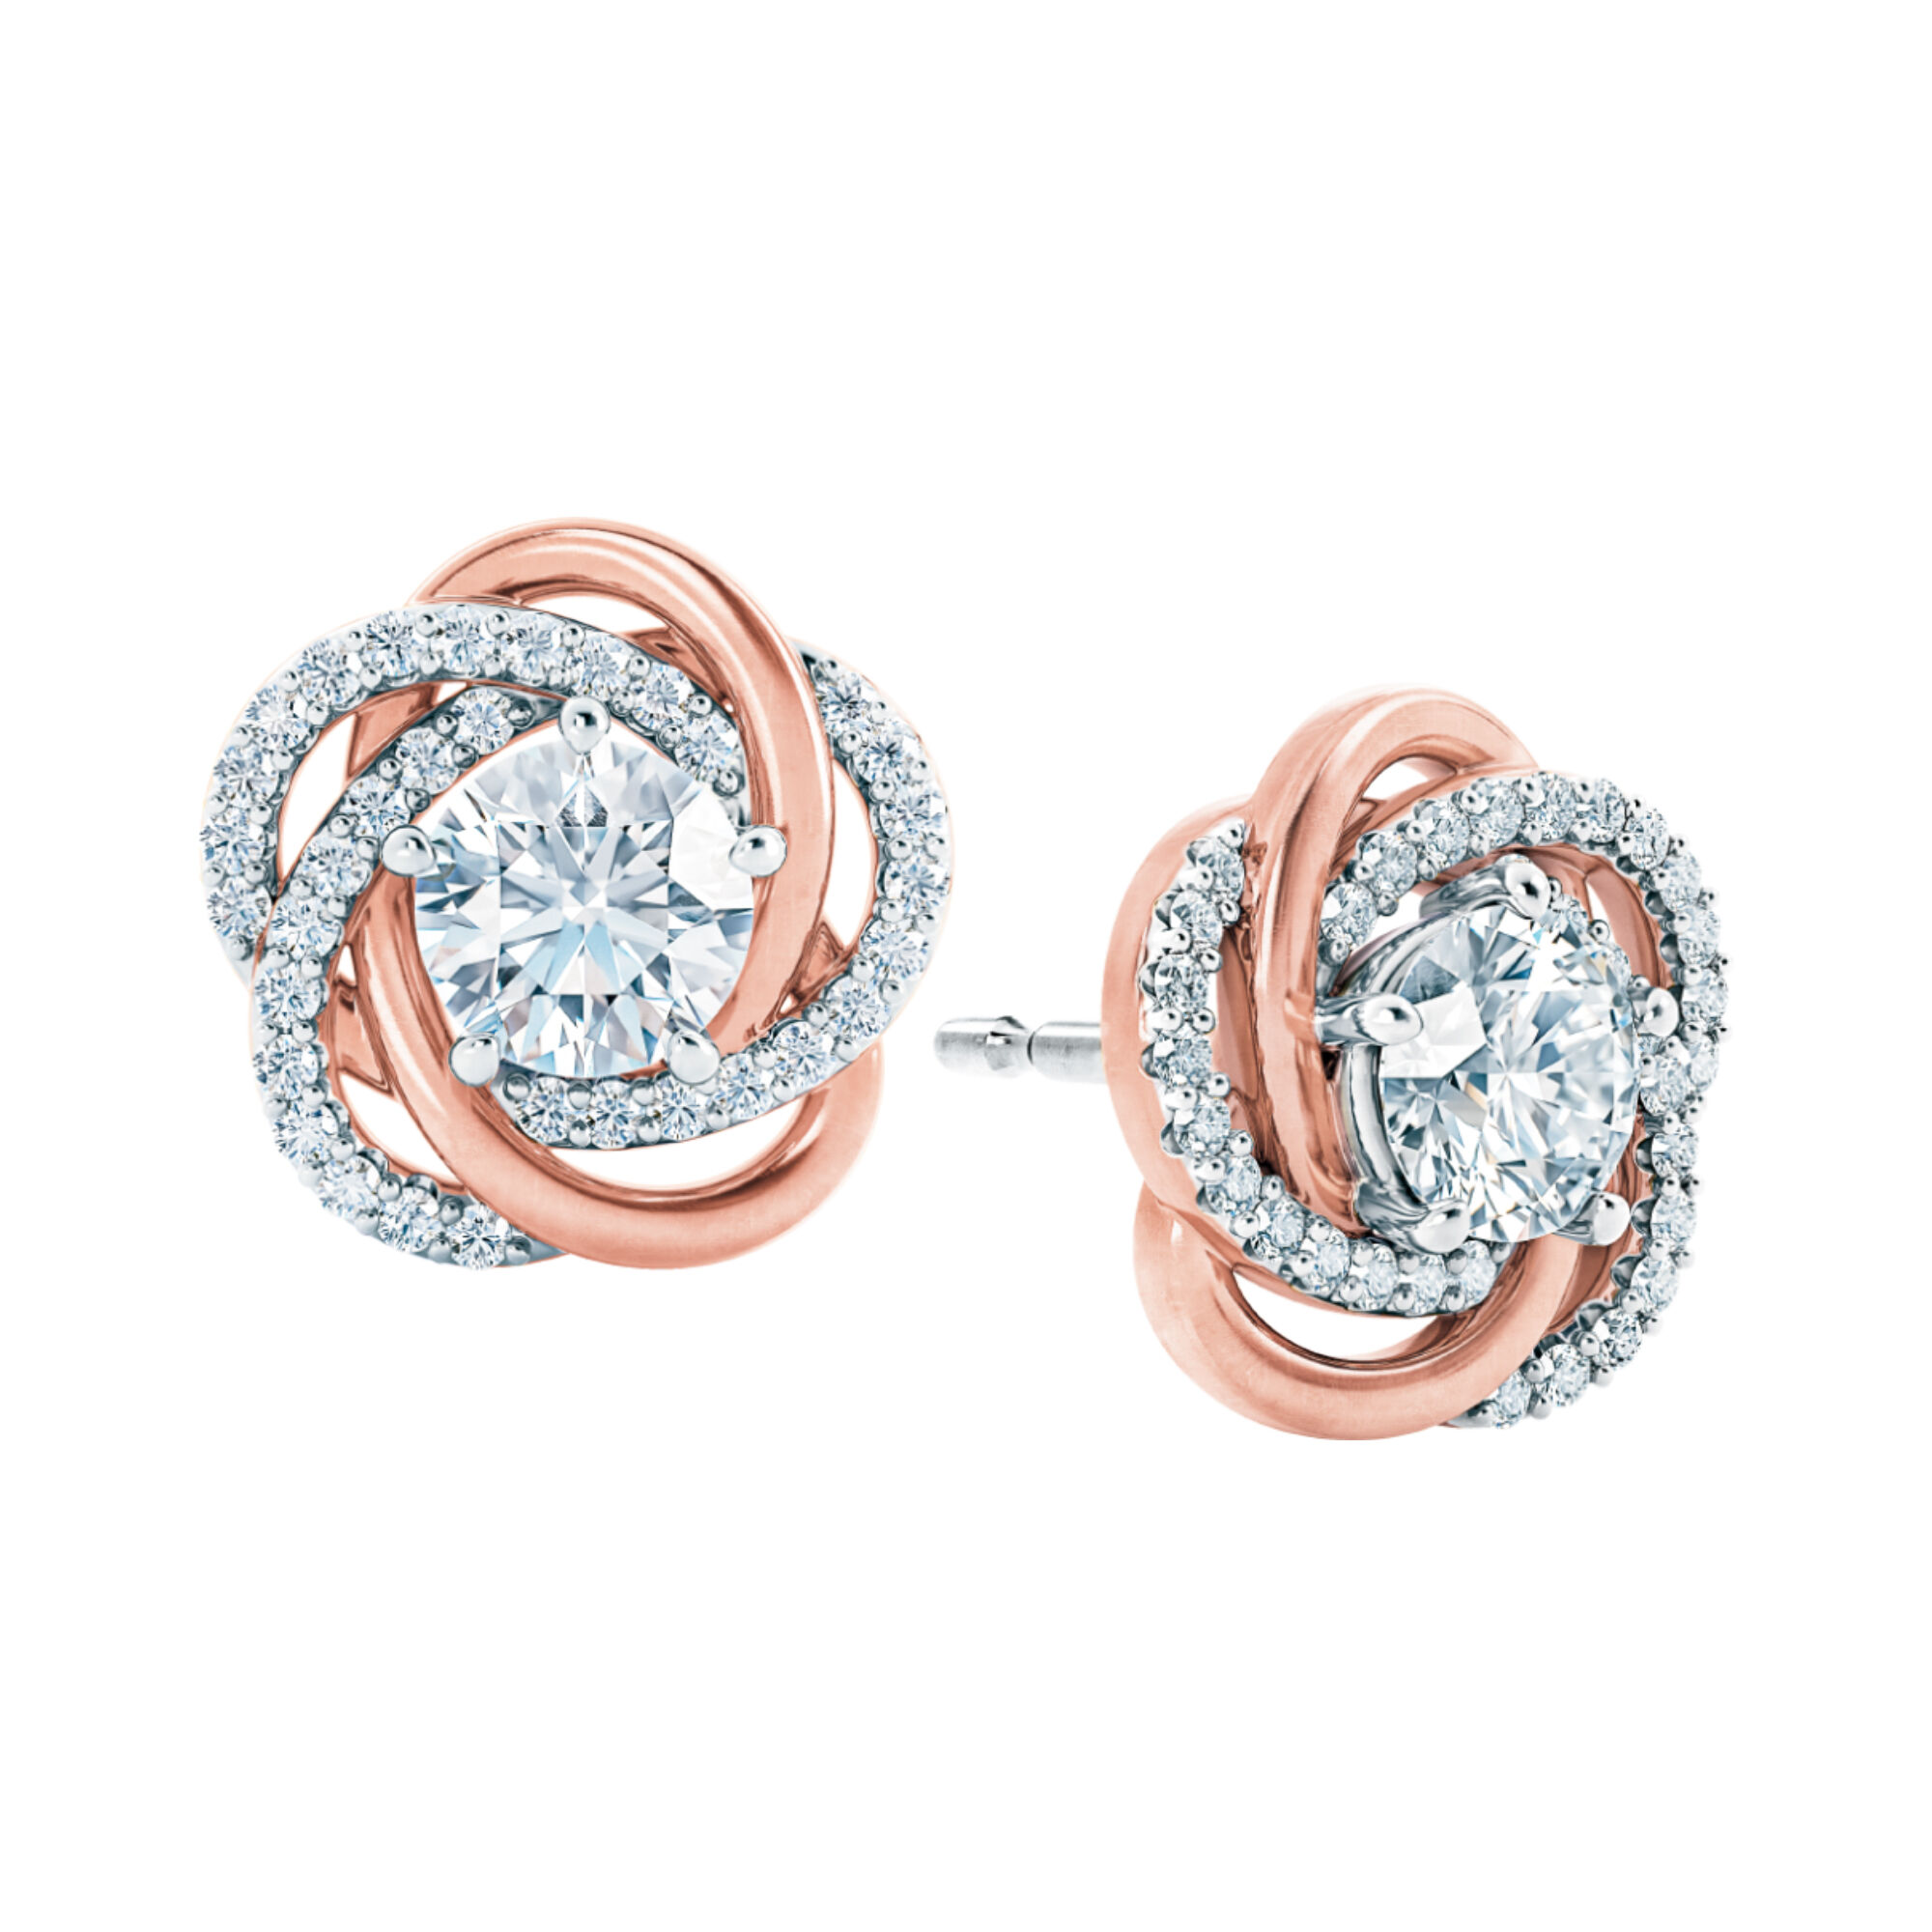 Perfectly Paired Love Knot Pendant with FREE Matching Earrings 10916 0010 c earring